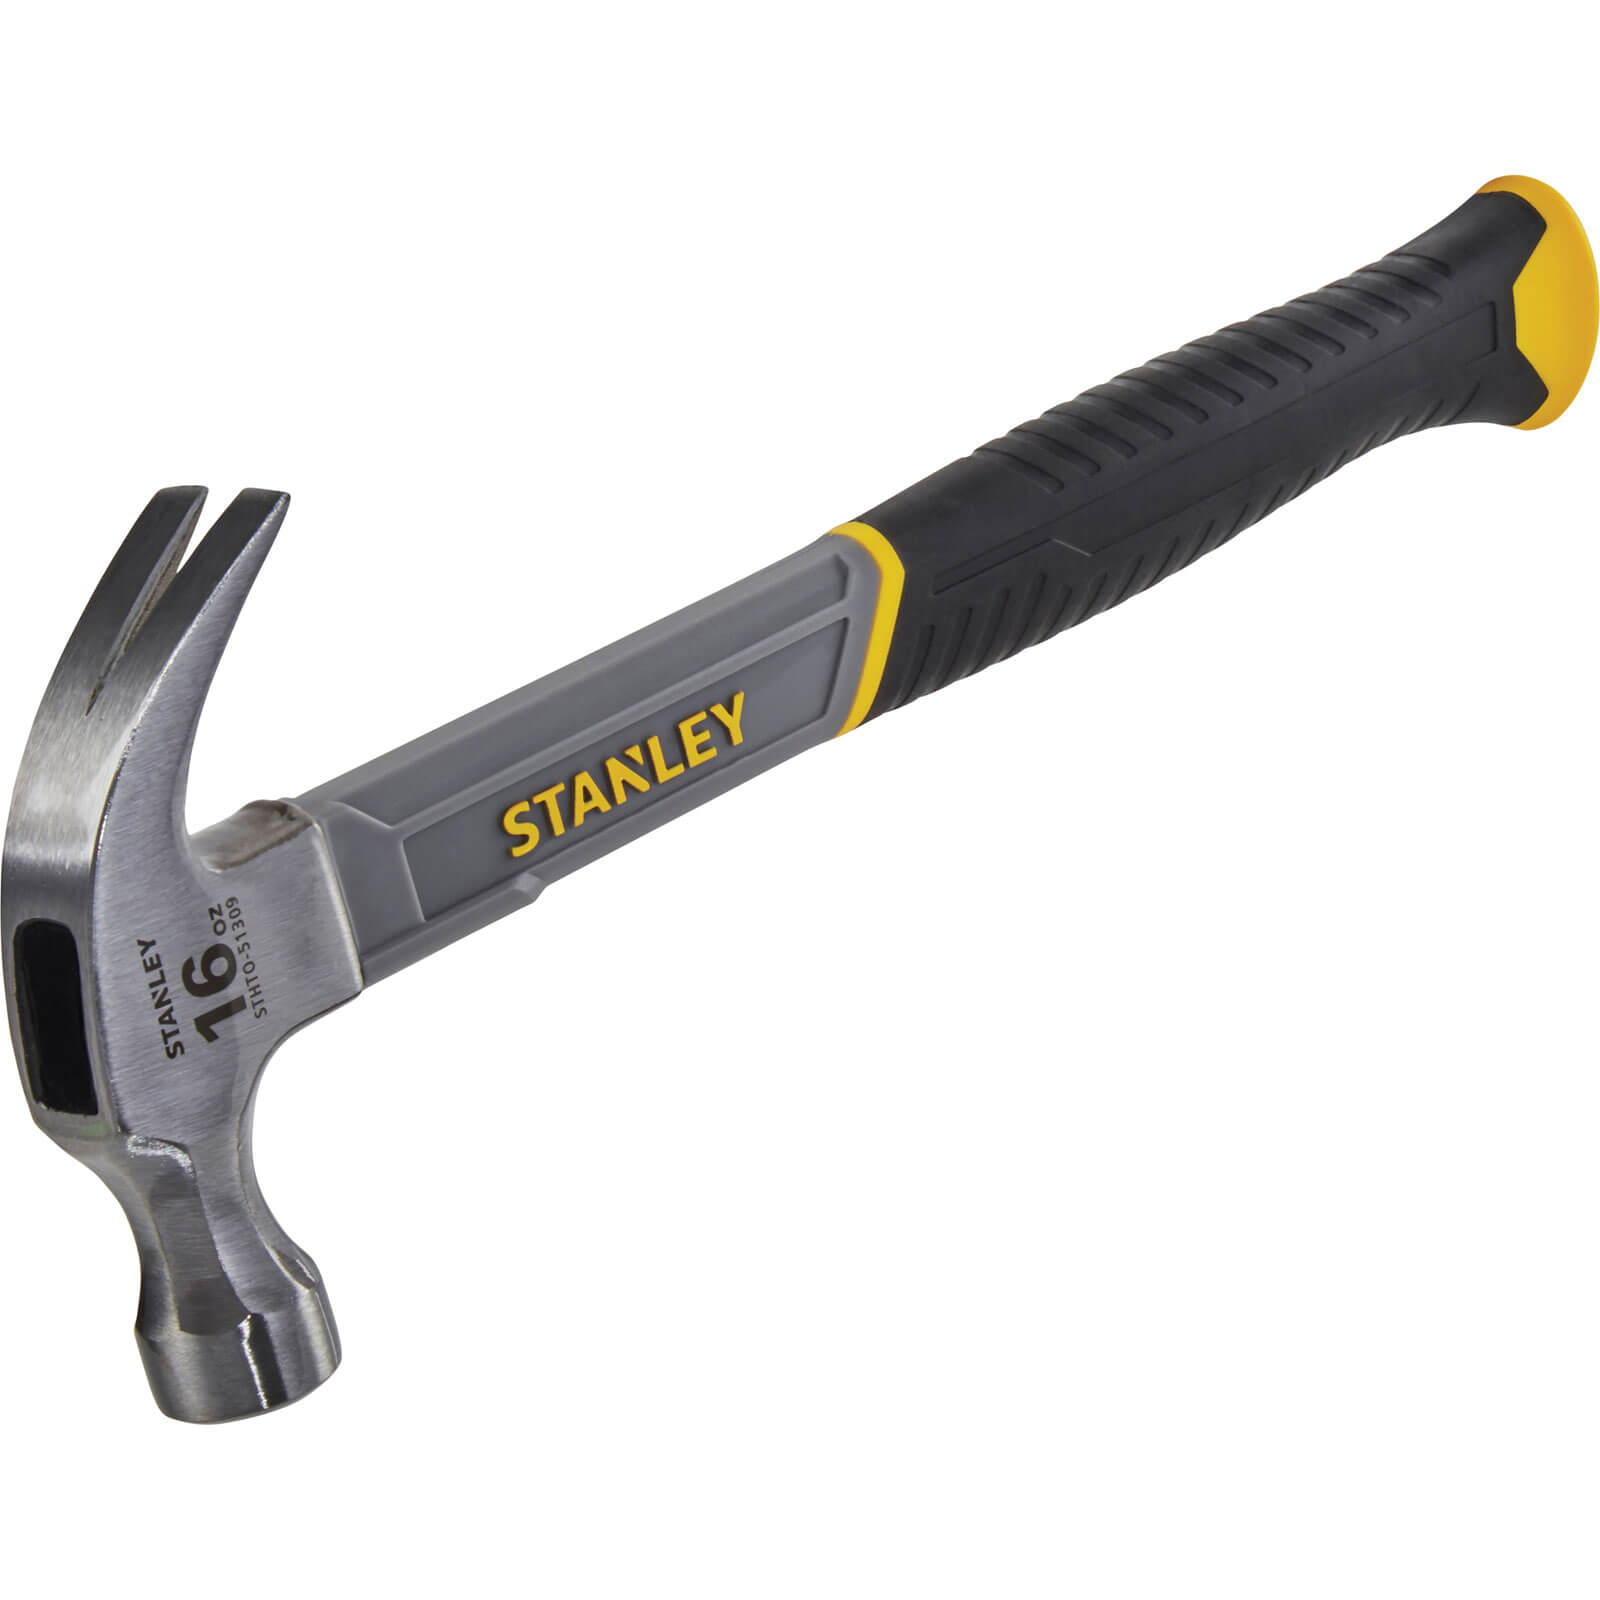 Image of Stanley Curved Claw Hammer Fibreglass Shaft 450g